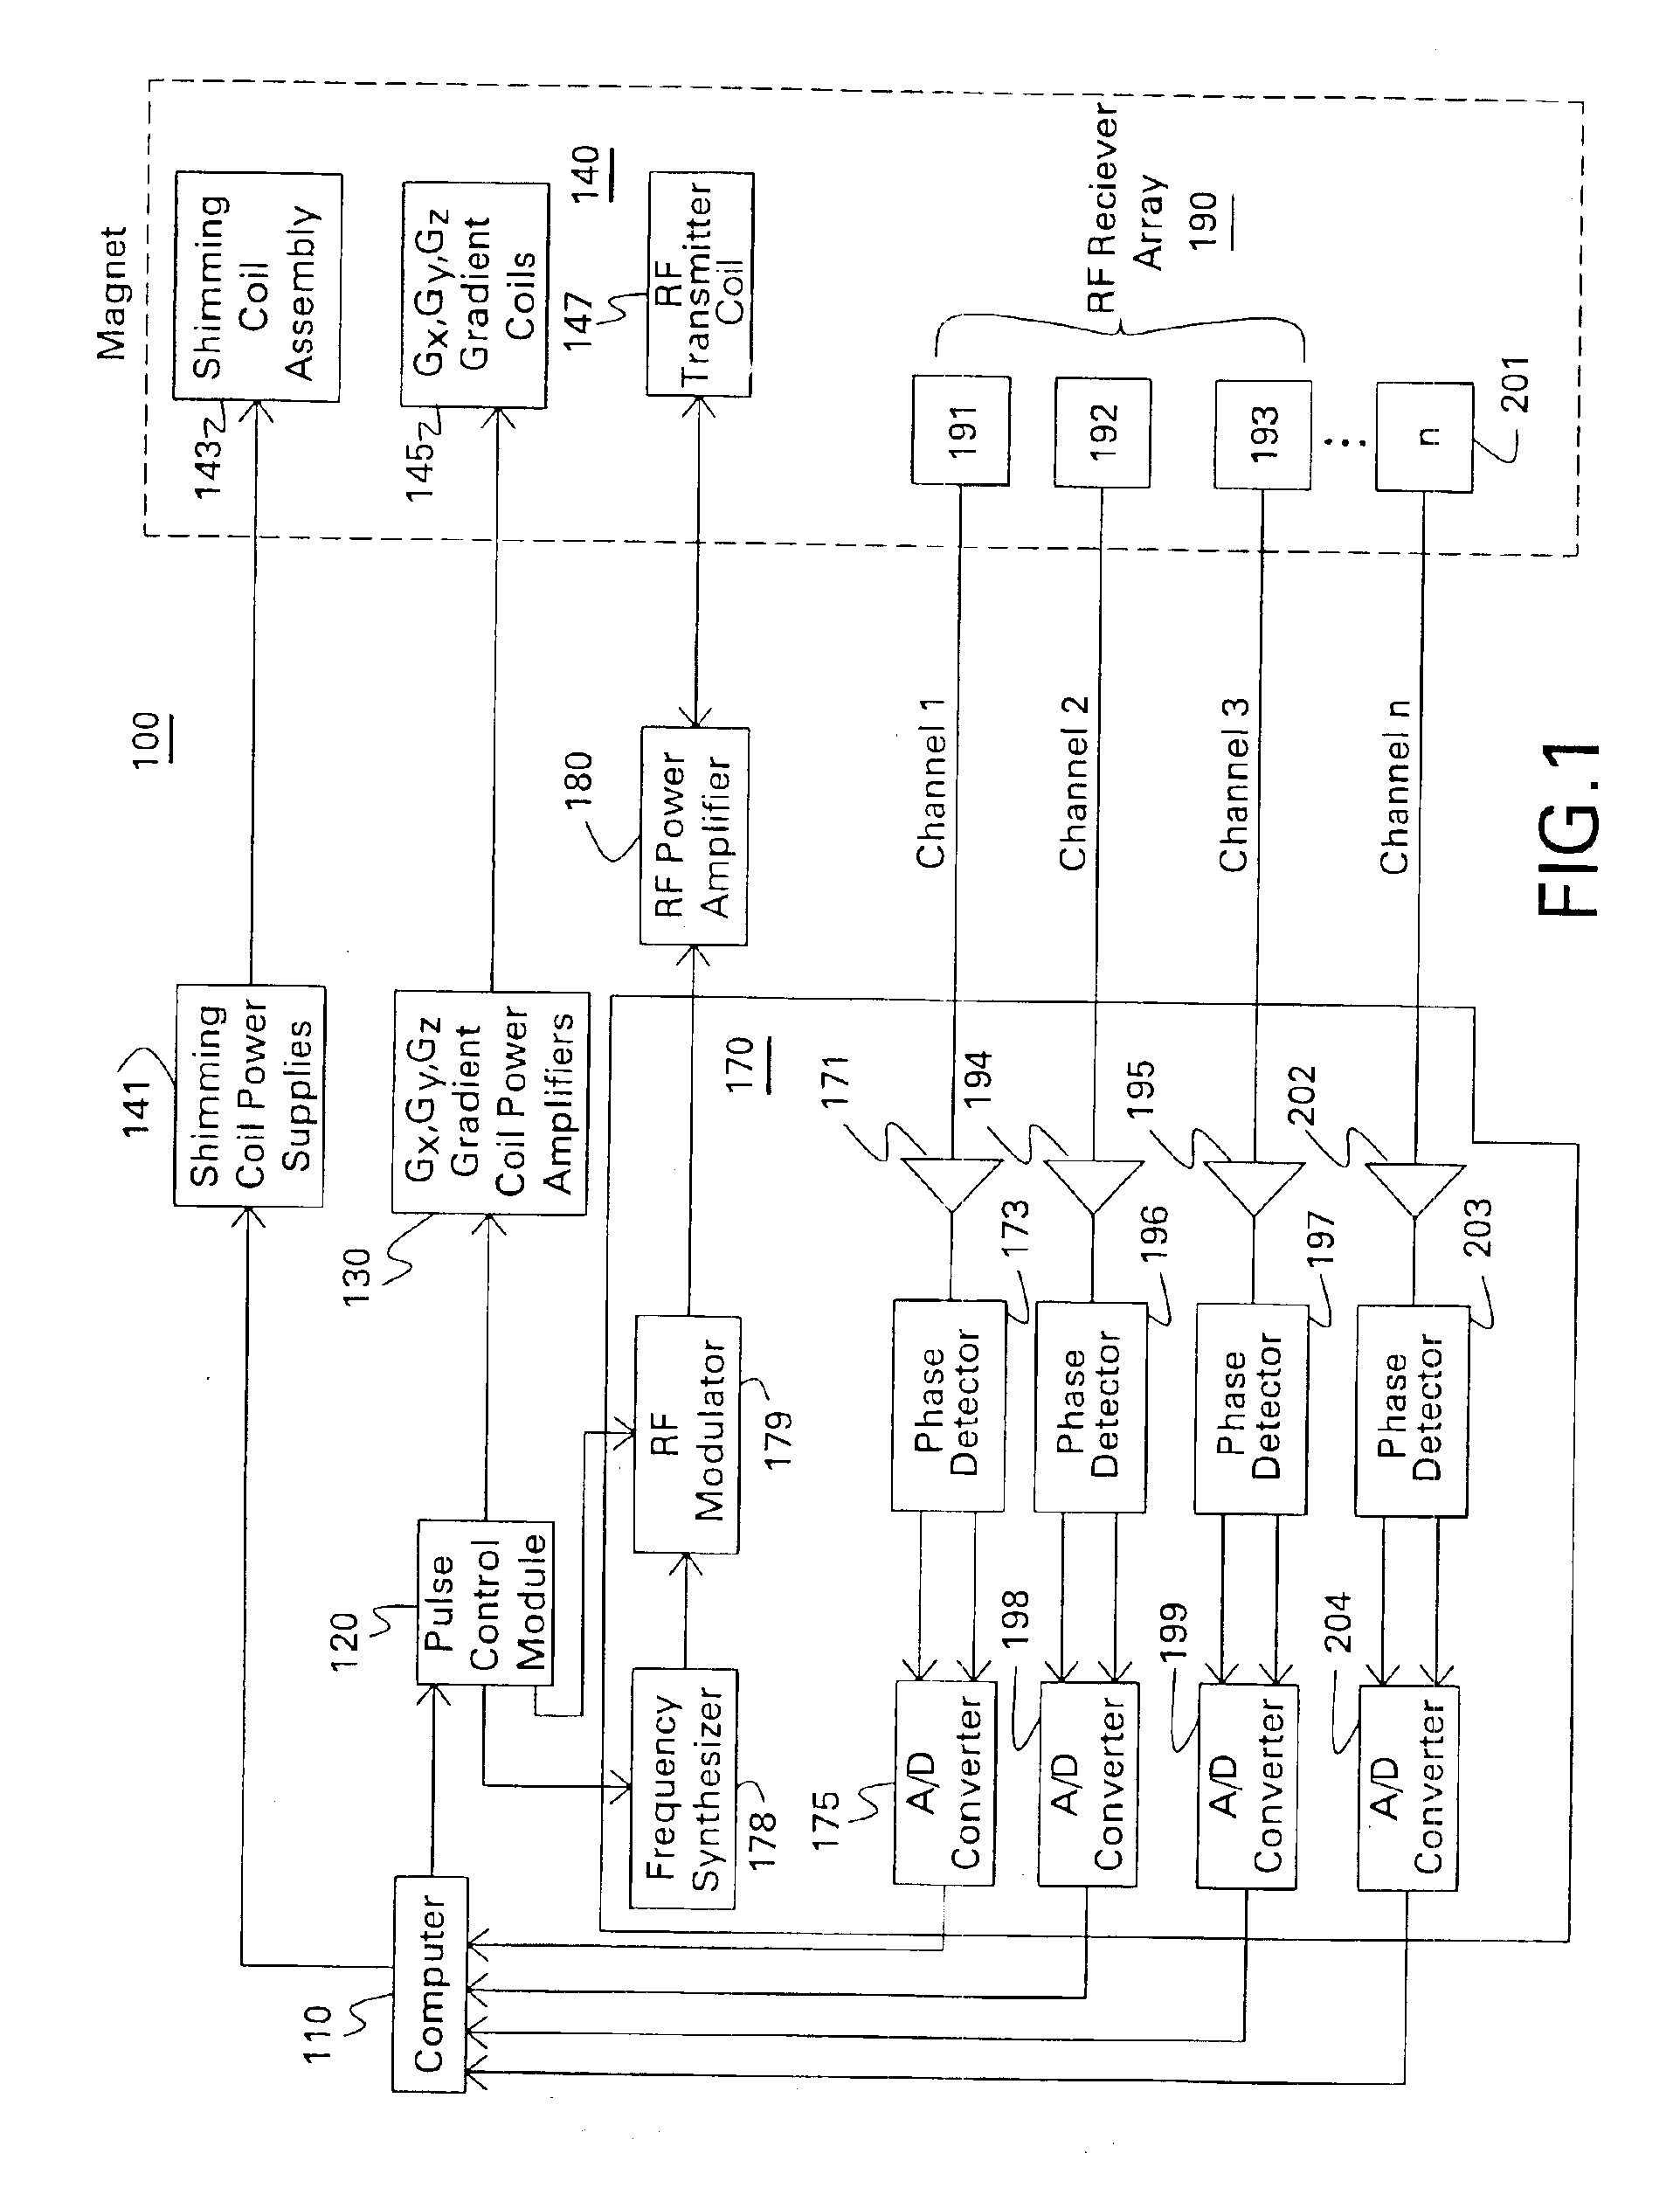 Method and system for accelerated imaging using parallel MRI